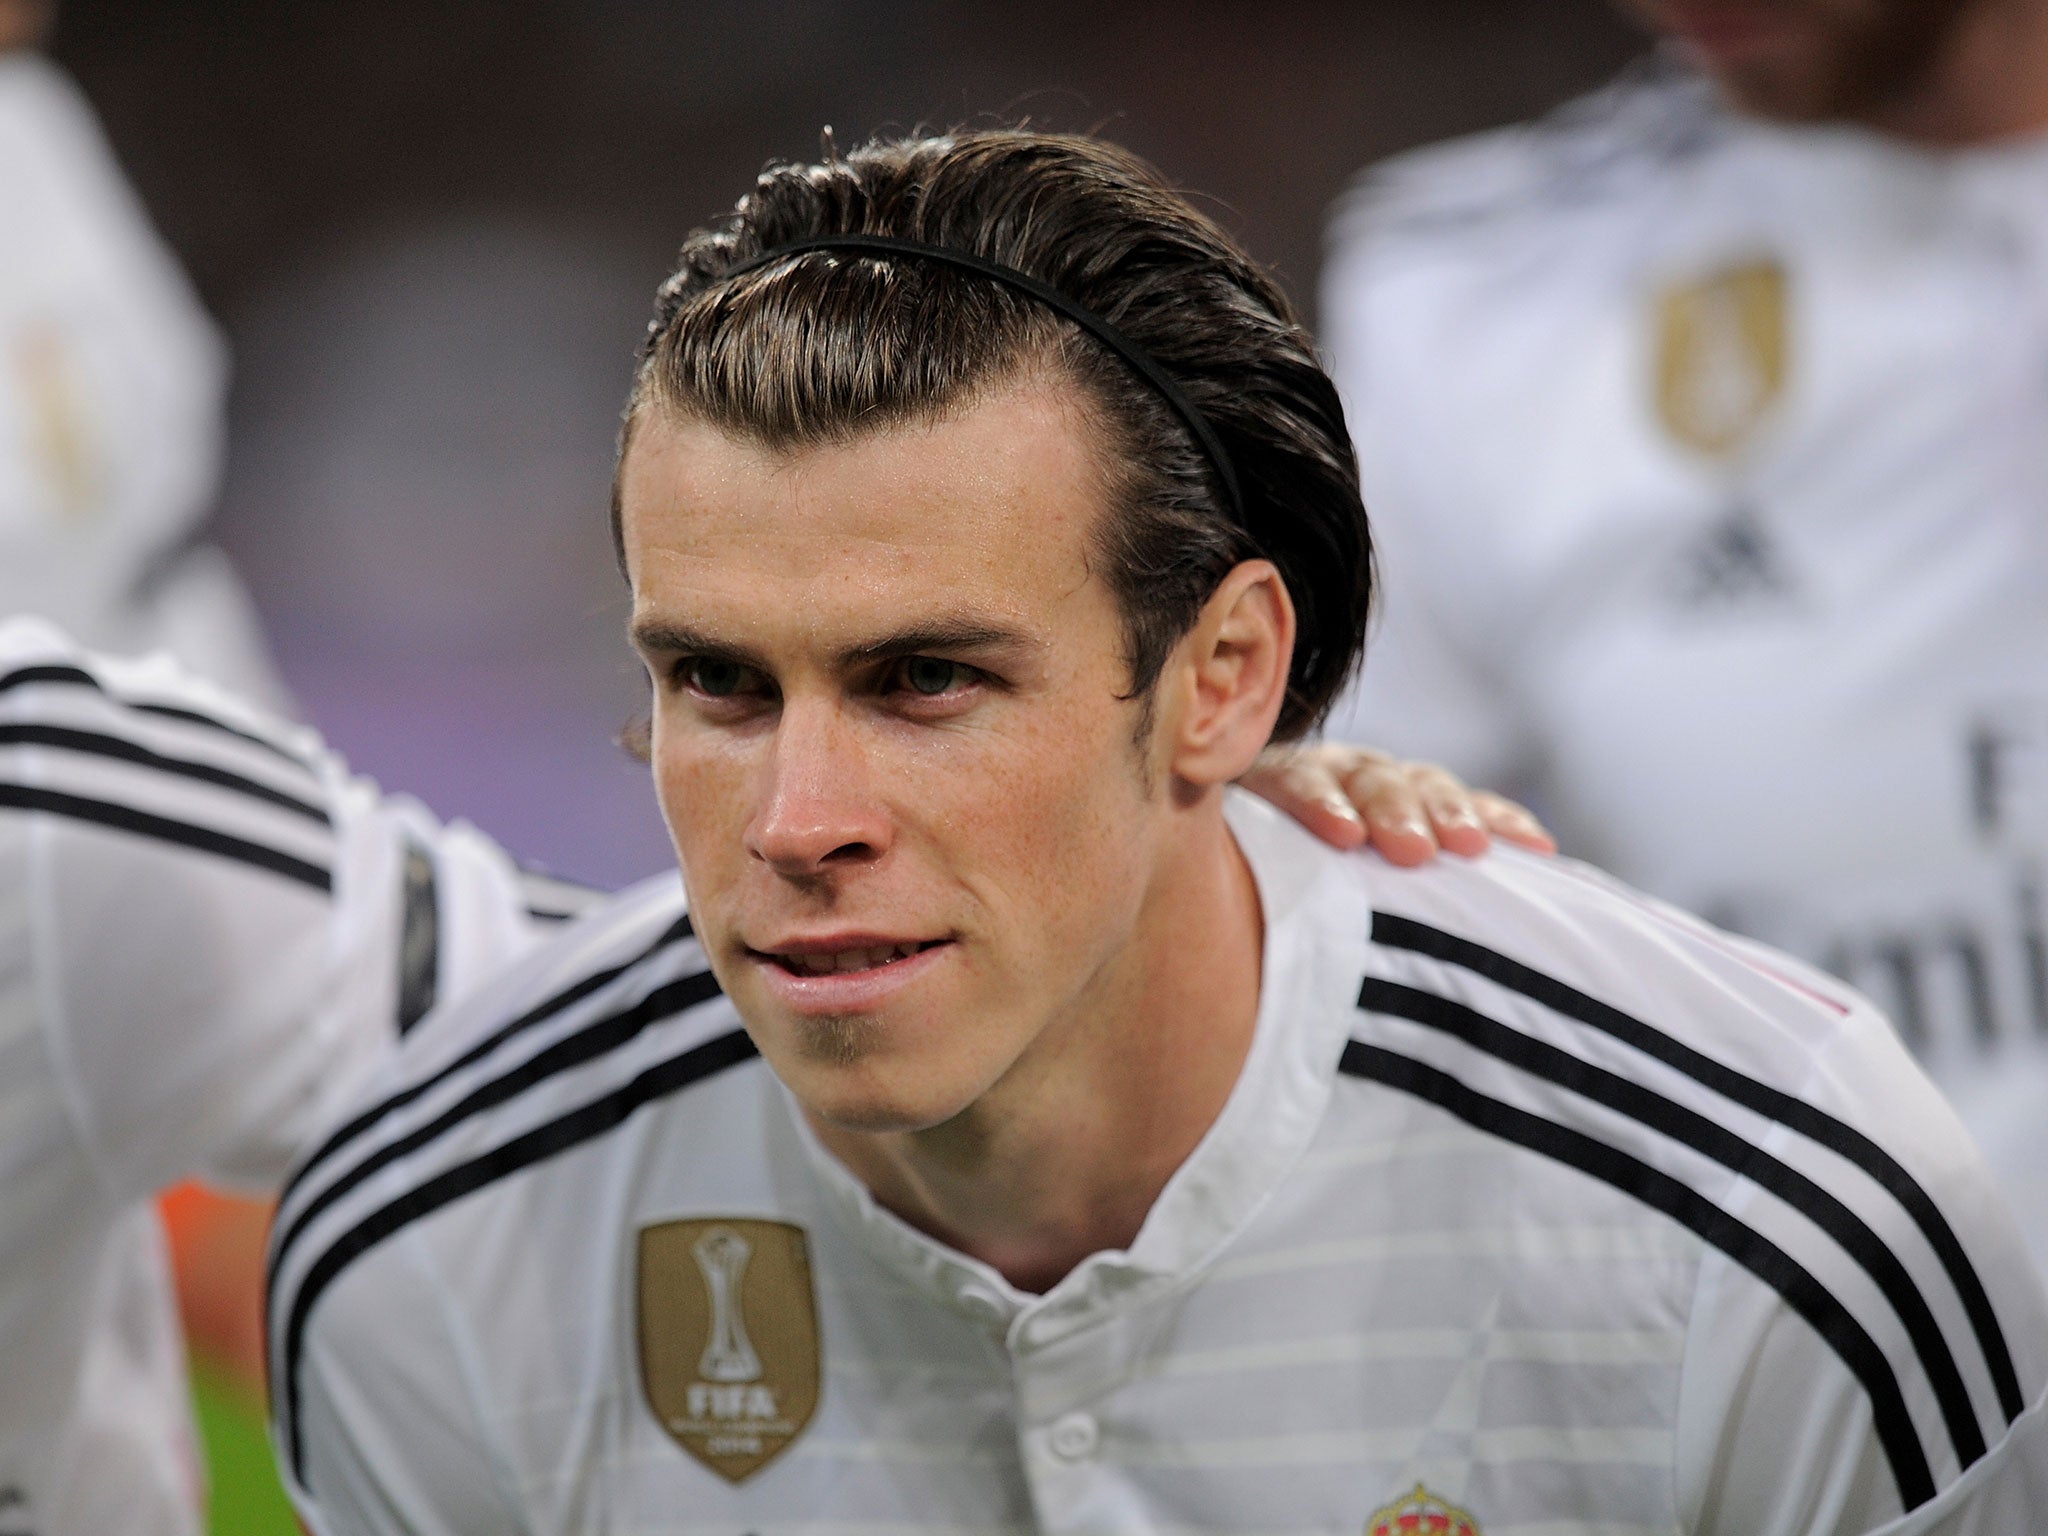 Gareth Bale is a reported target for Manchester United and Chelsea